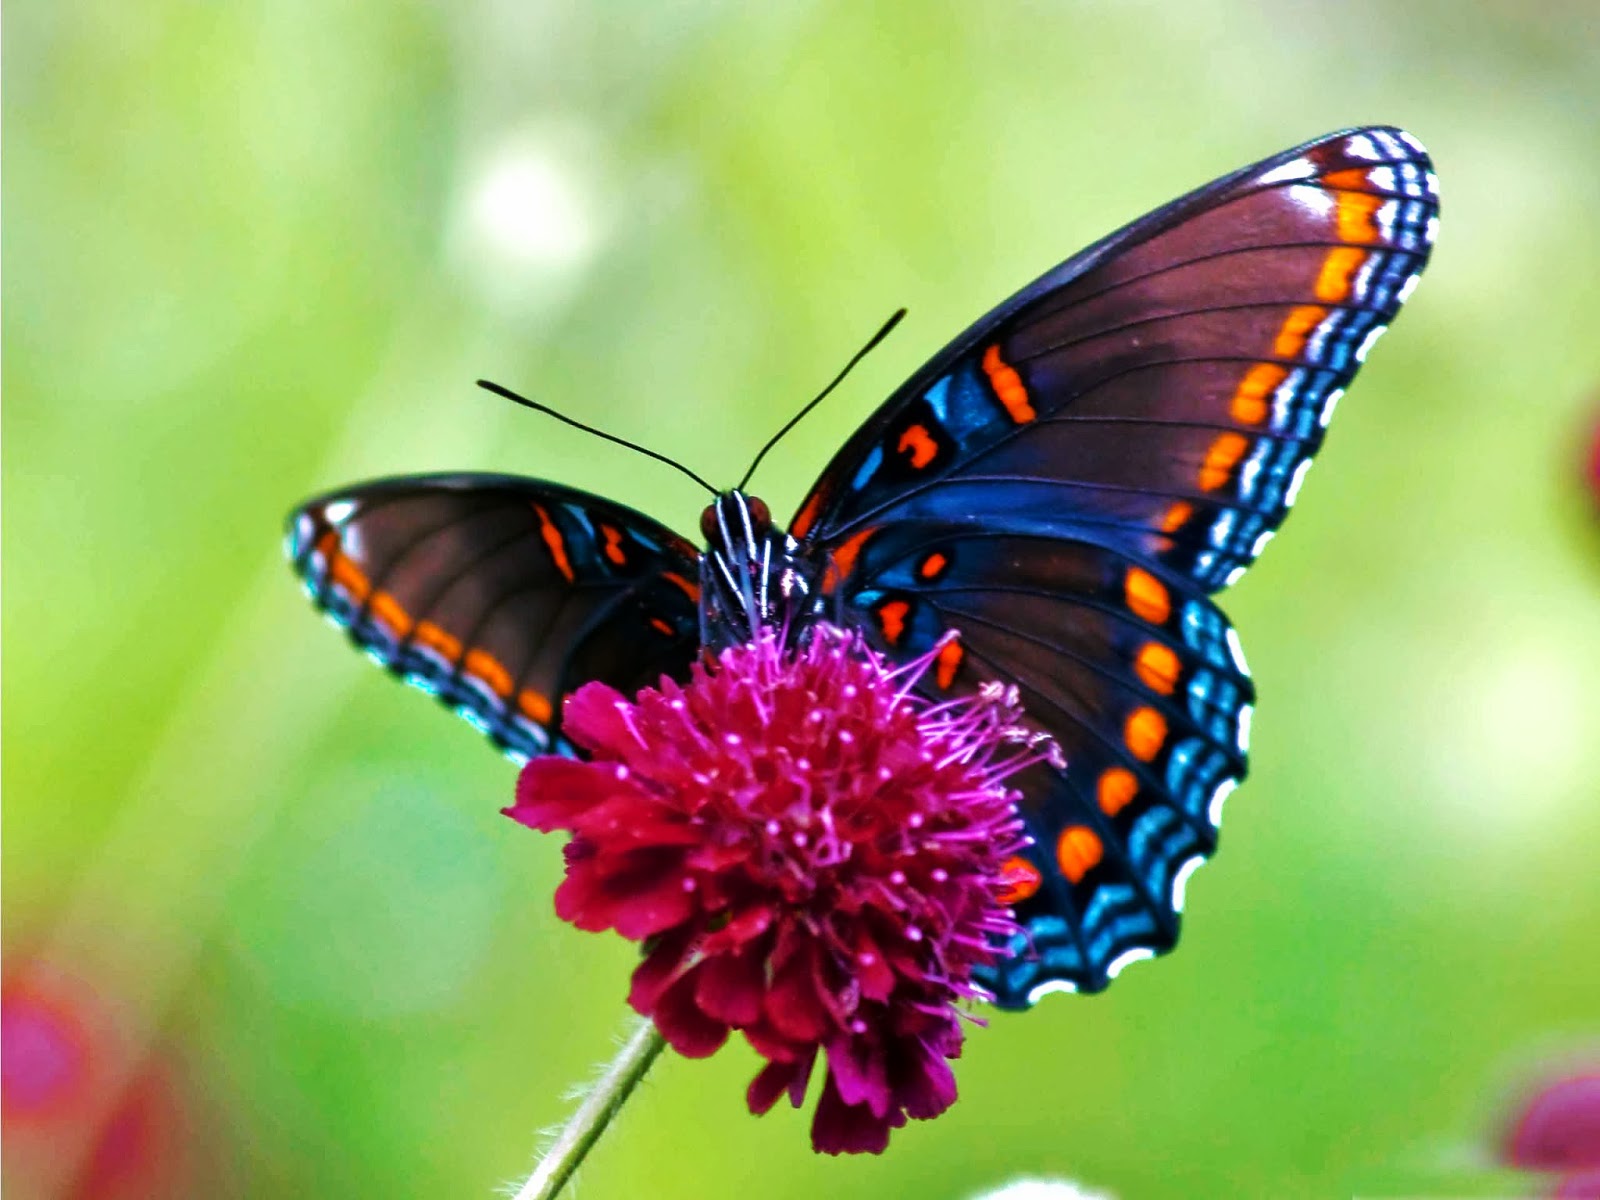 Download Free live butterfly wallpaper in high resolution for free